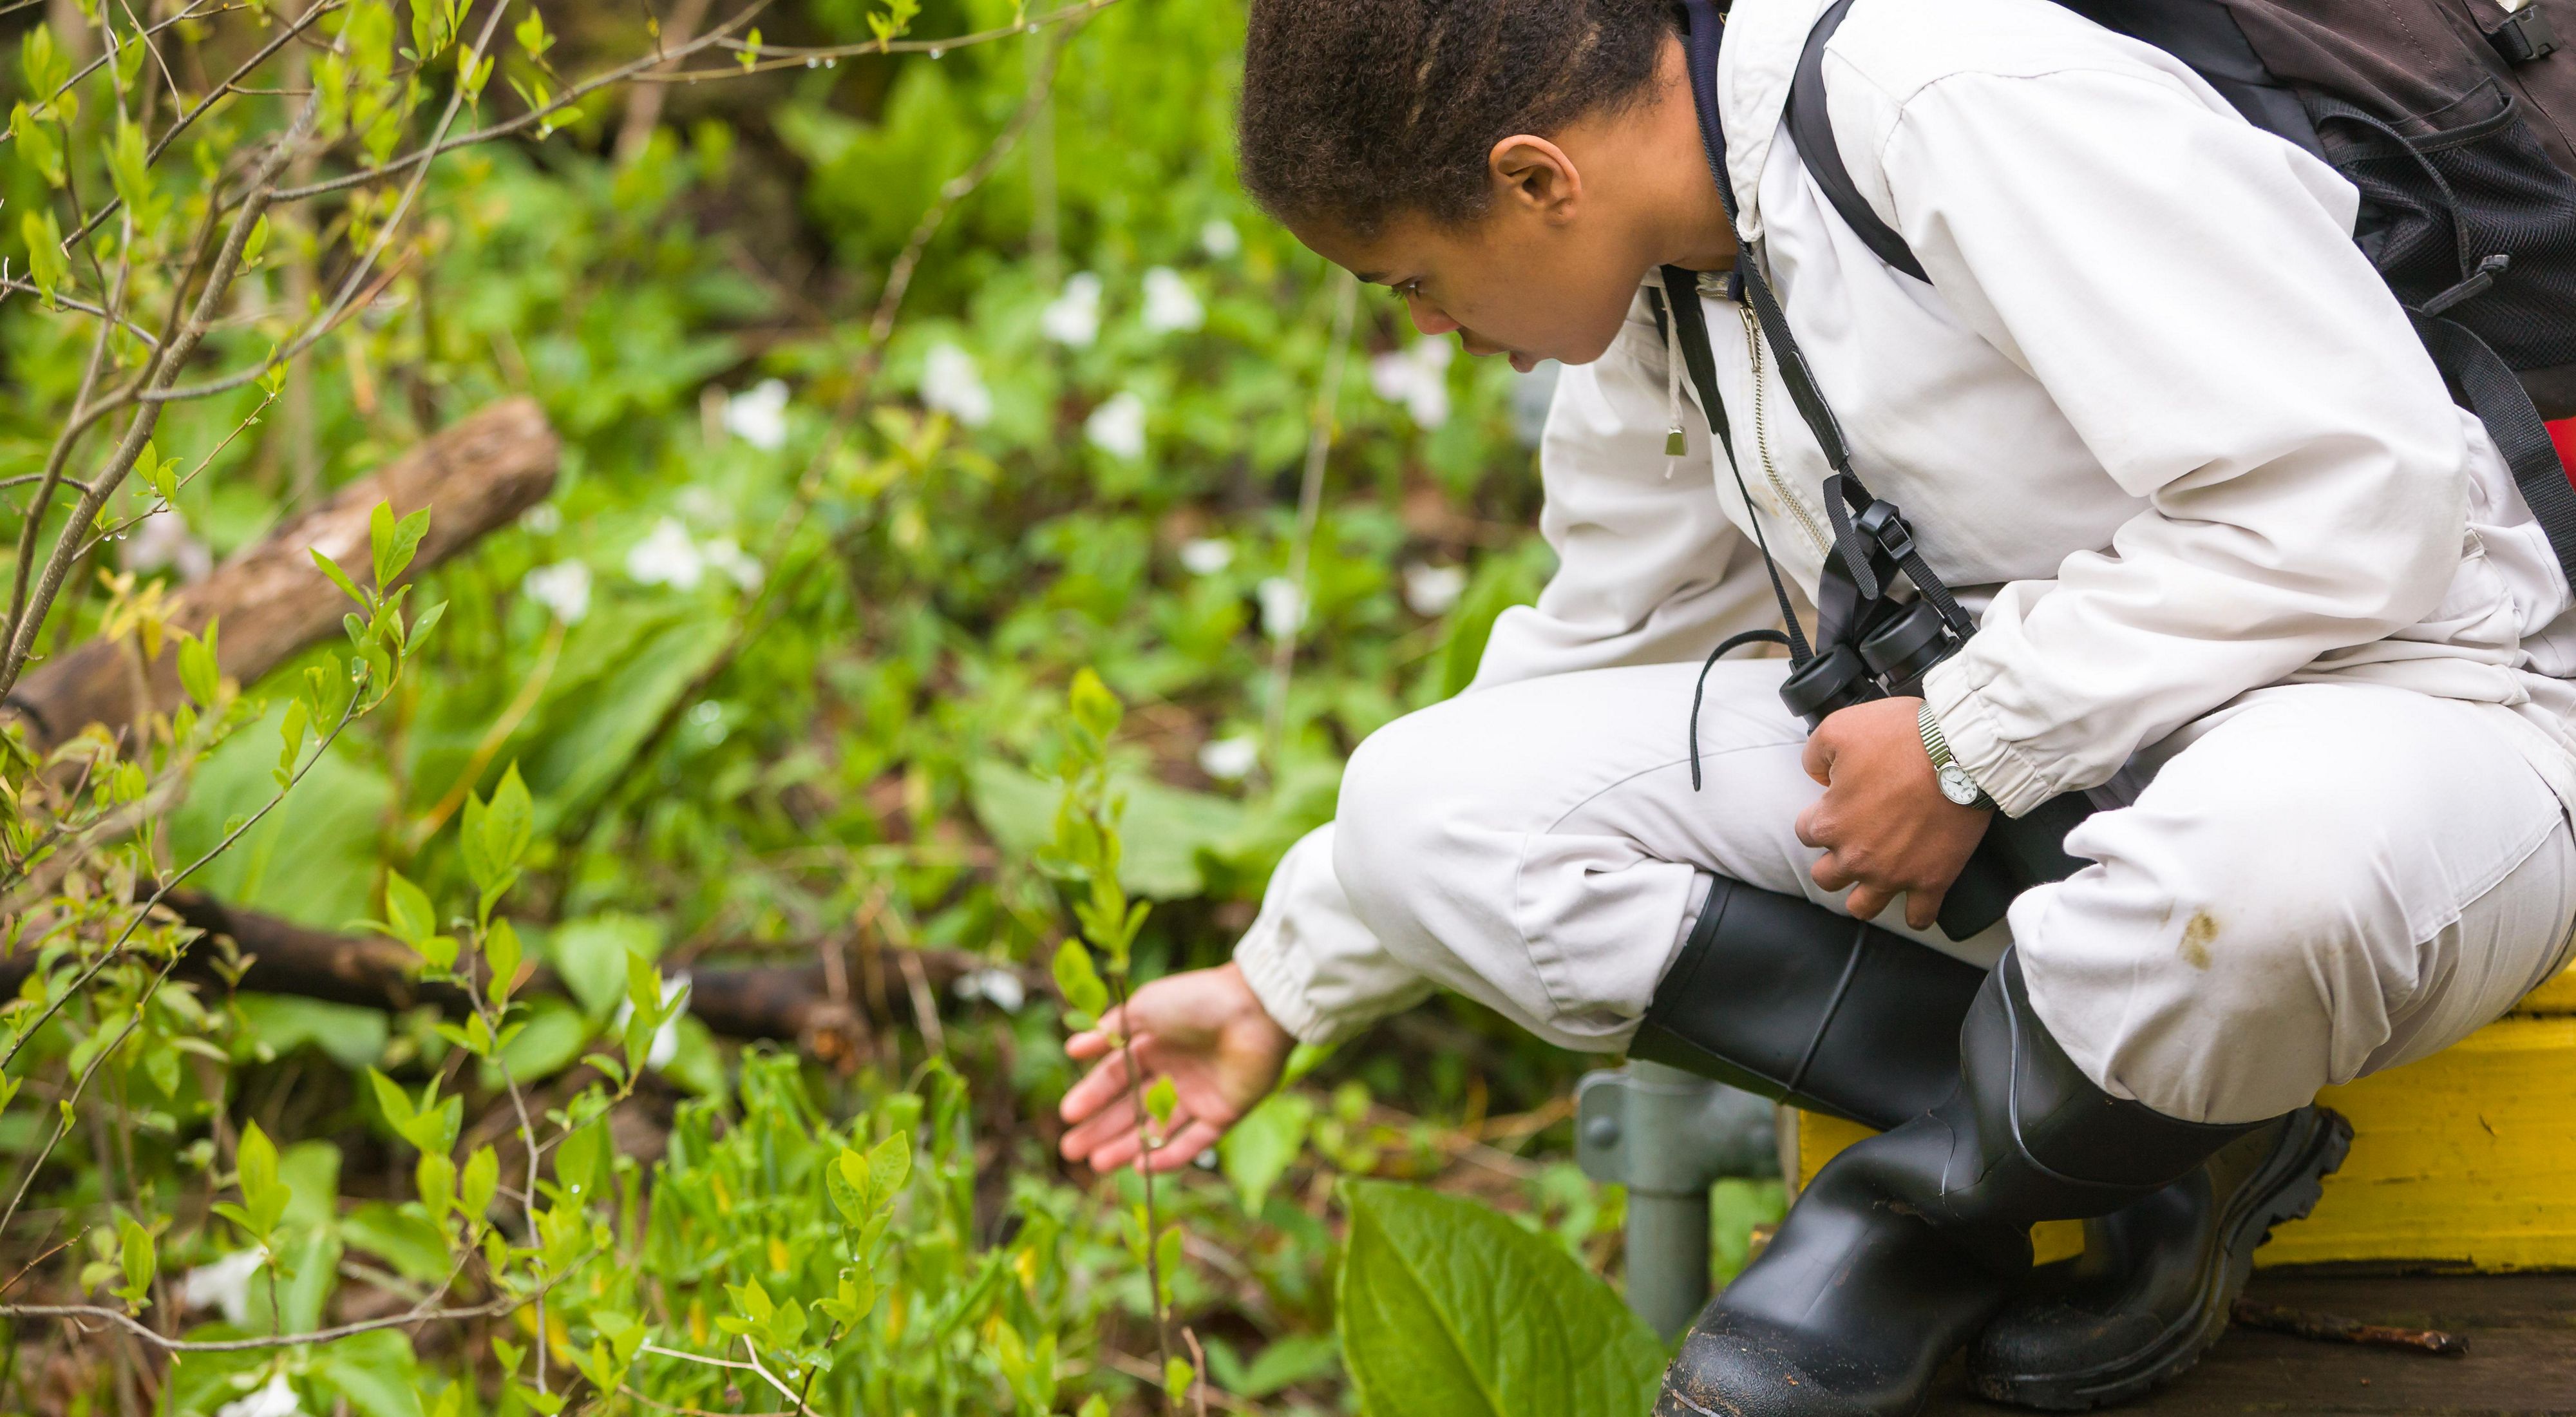 A girl wearing rubber boots and carrying binoculars bends over to look closely at a plant.